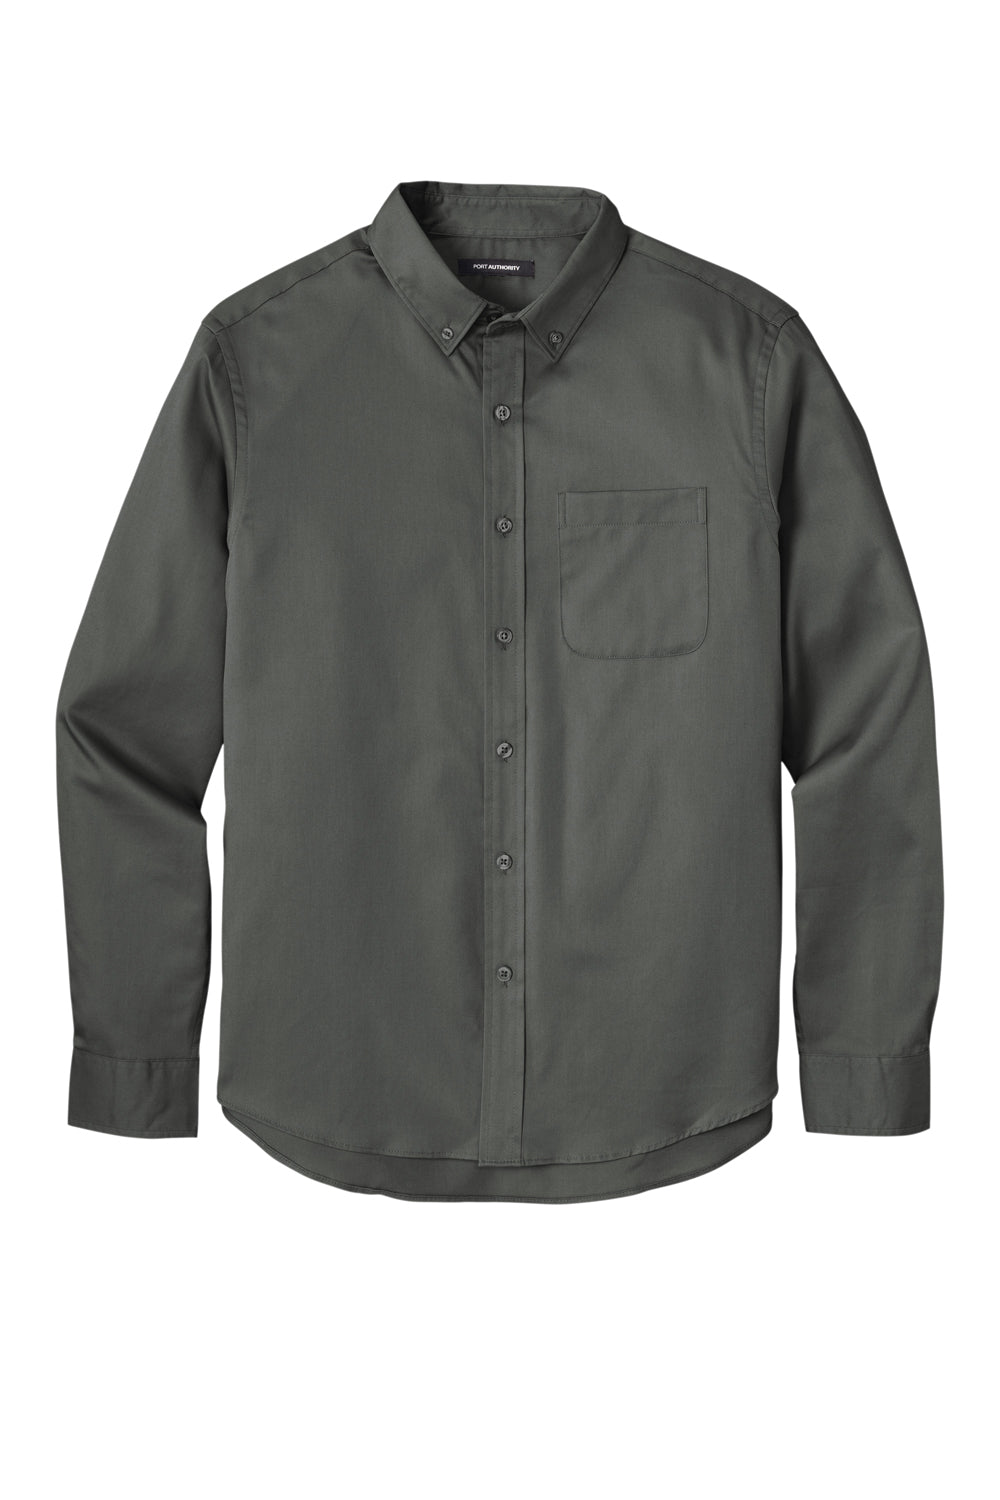 Port Authority W808 SuperPro Wrinkle Resistant React Long Sleeve Button Down Shirt w/ Pocket Storm Grey Flat Front